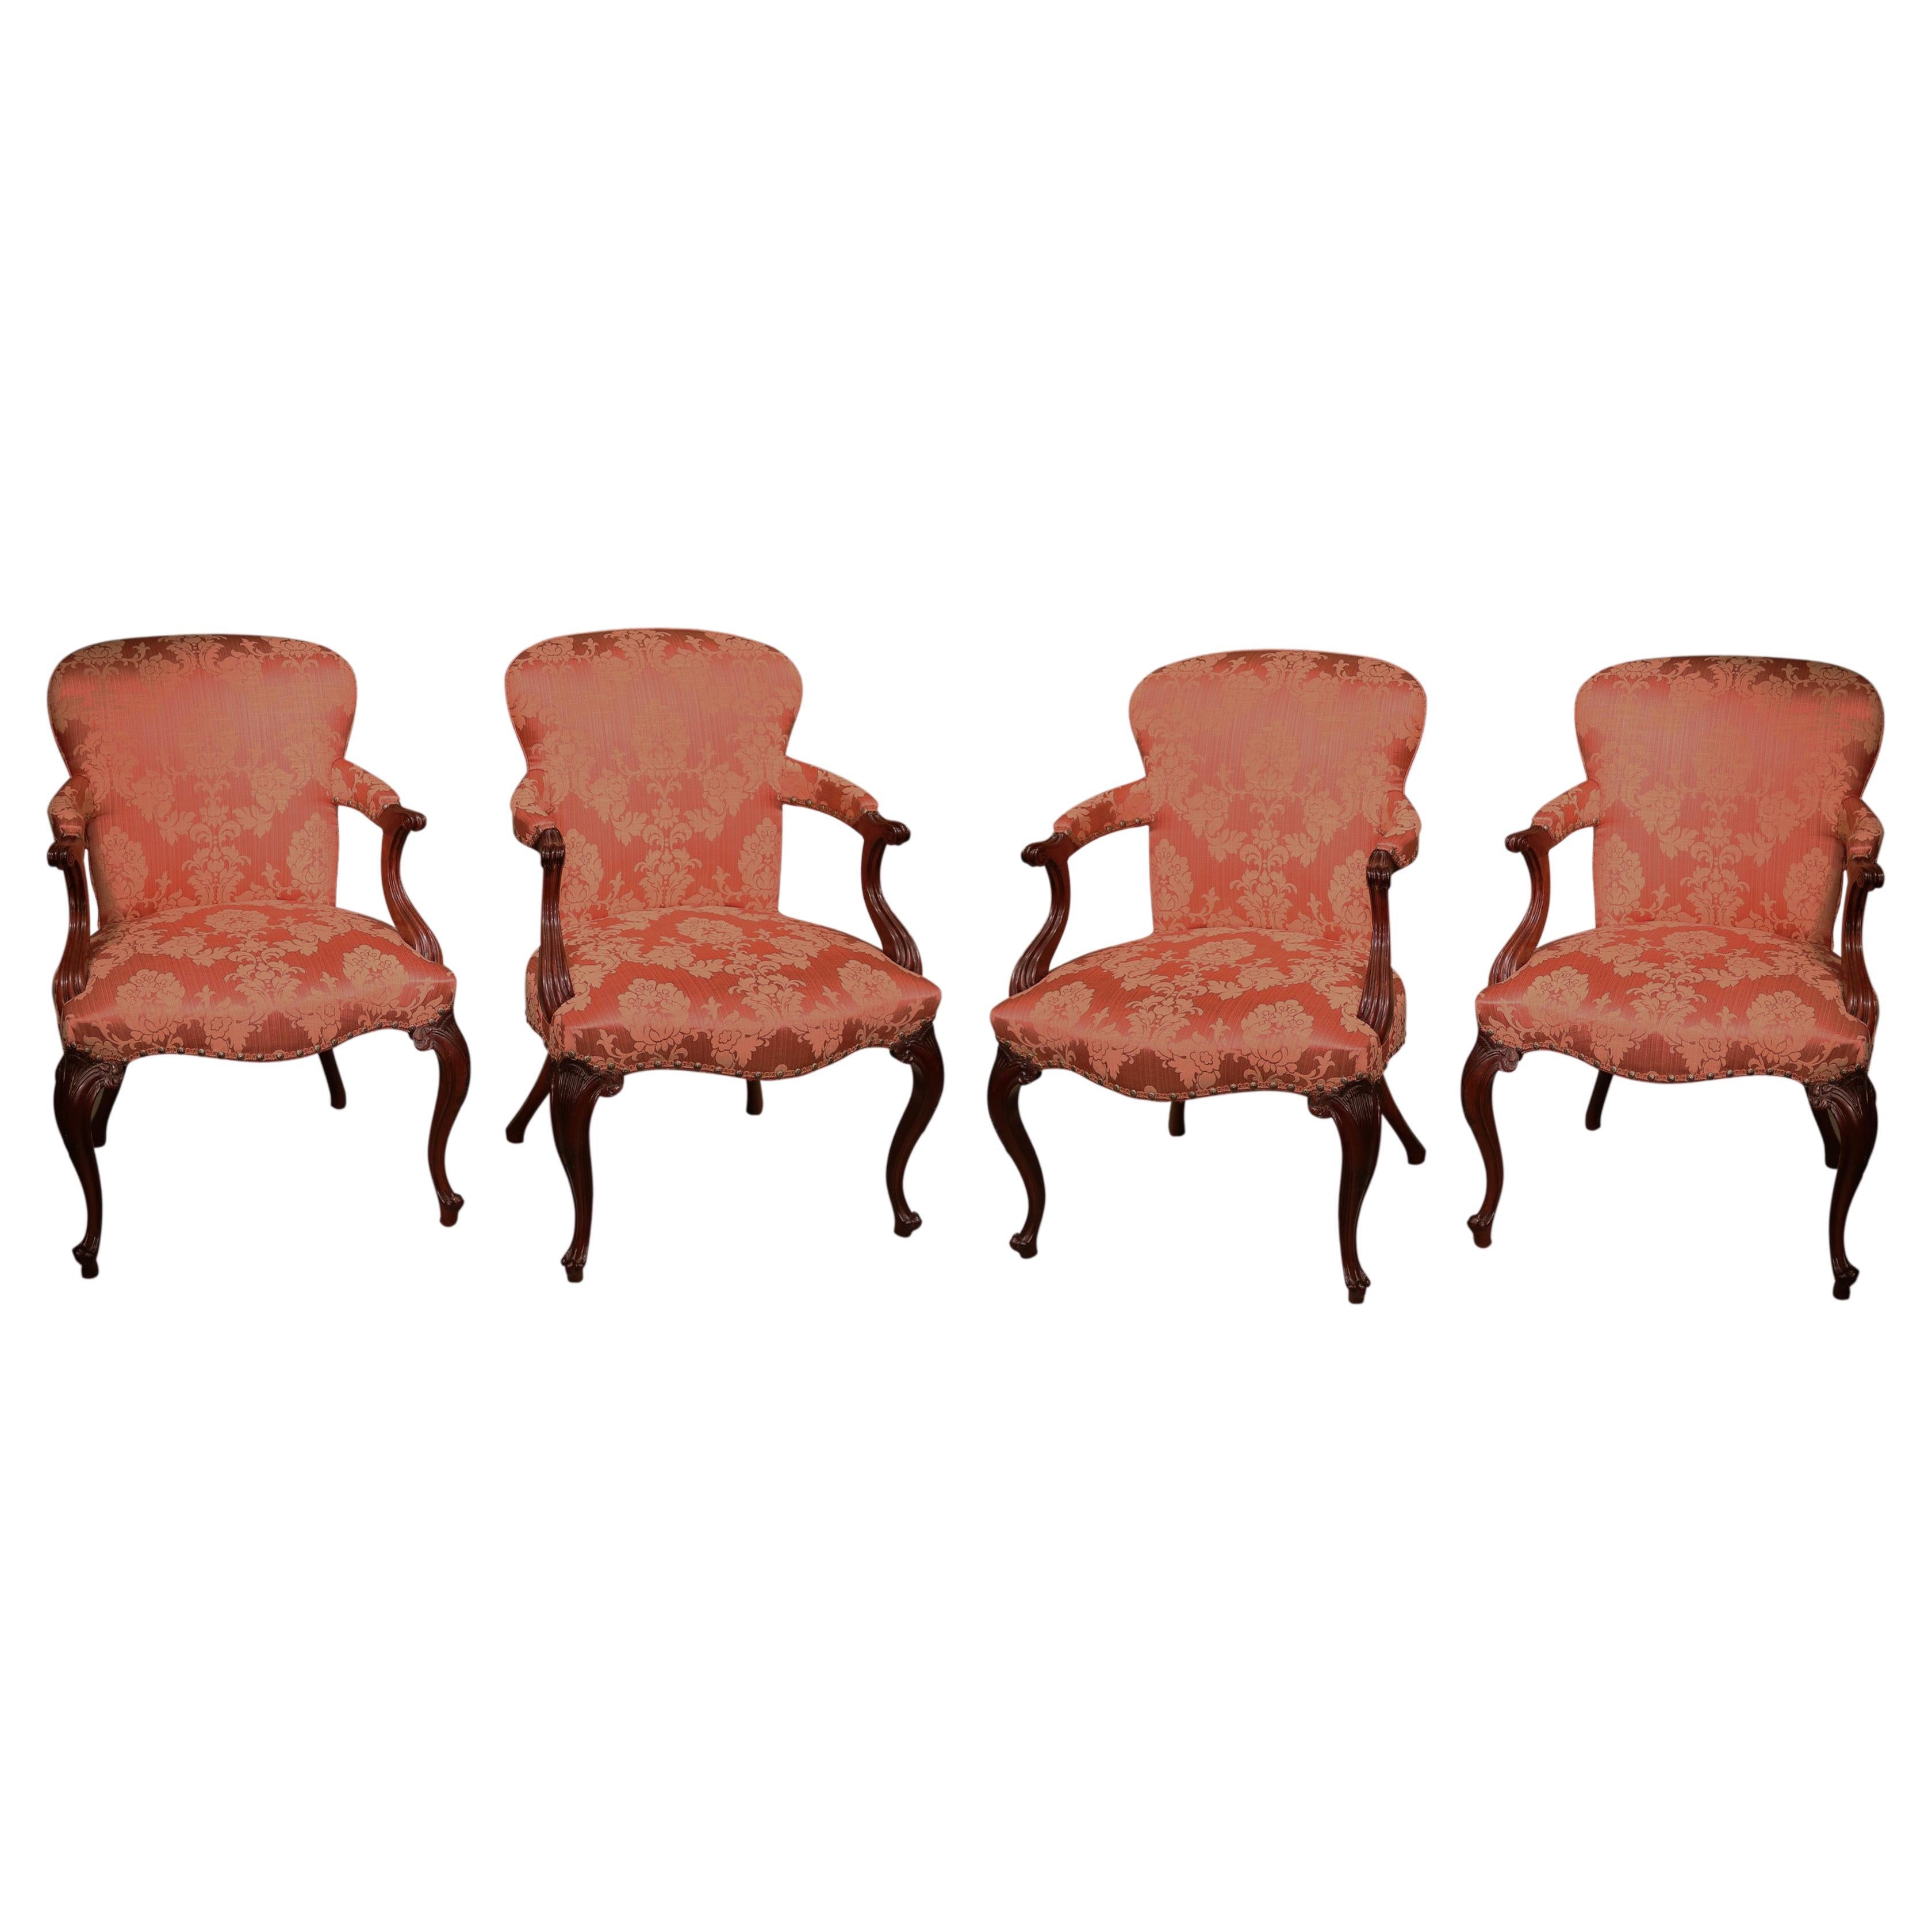 Antique set of four Hepplewhite period carved mahogany stuffed back armchairs